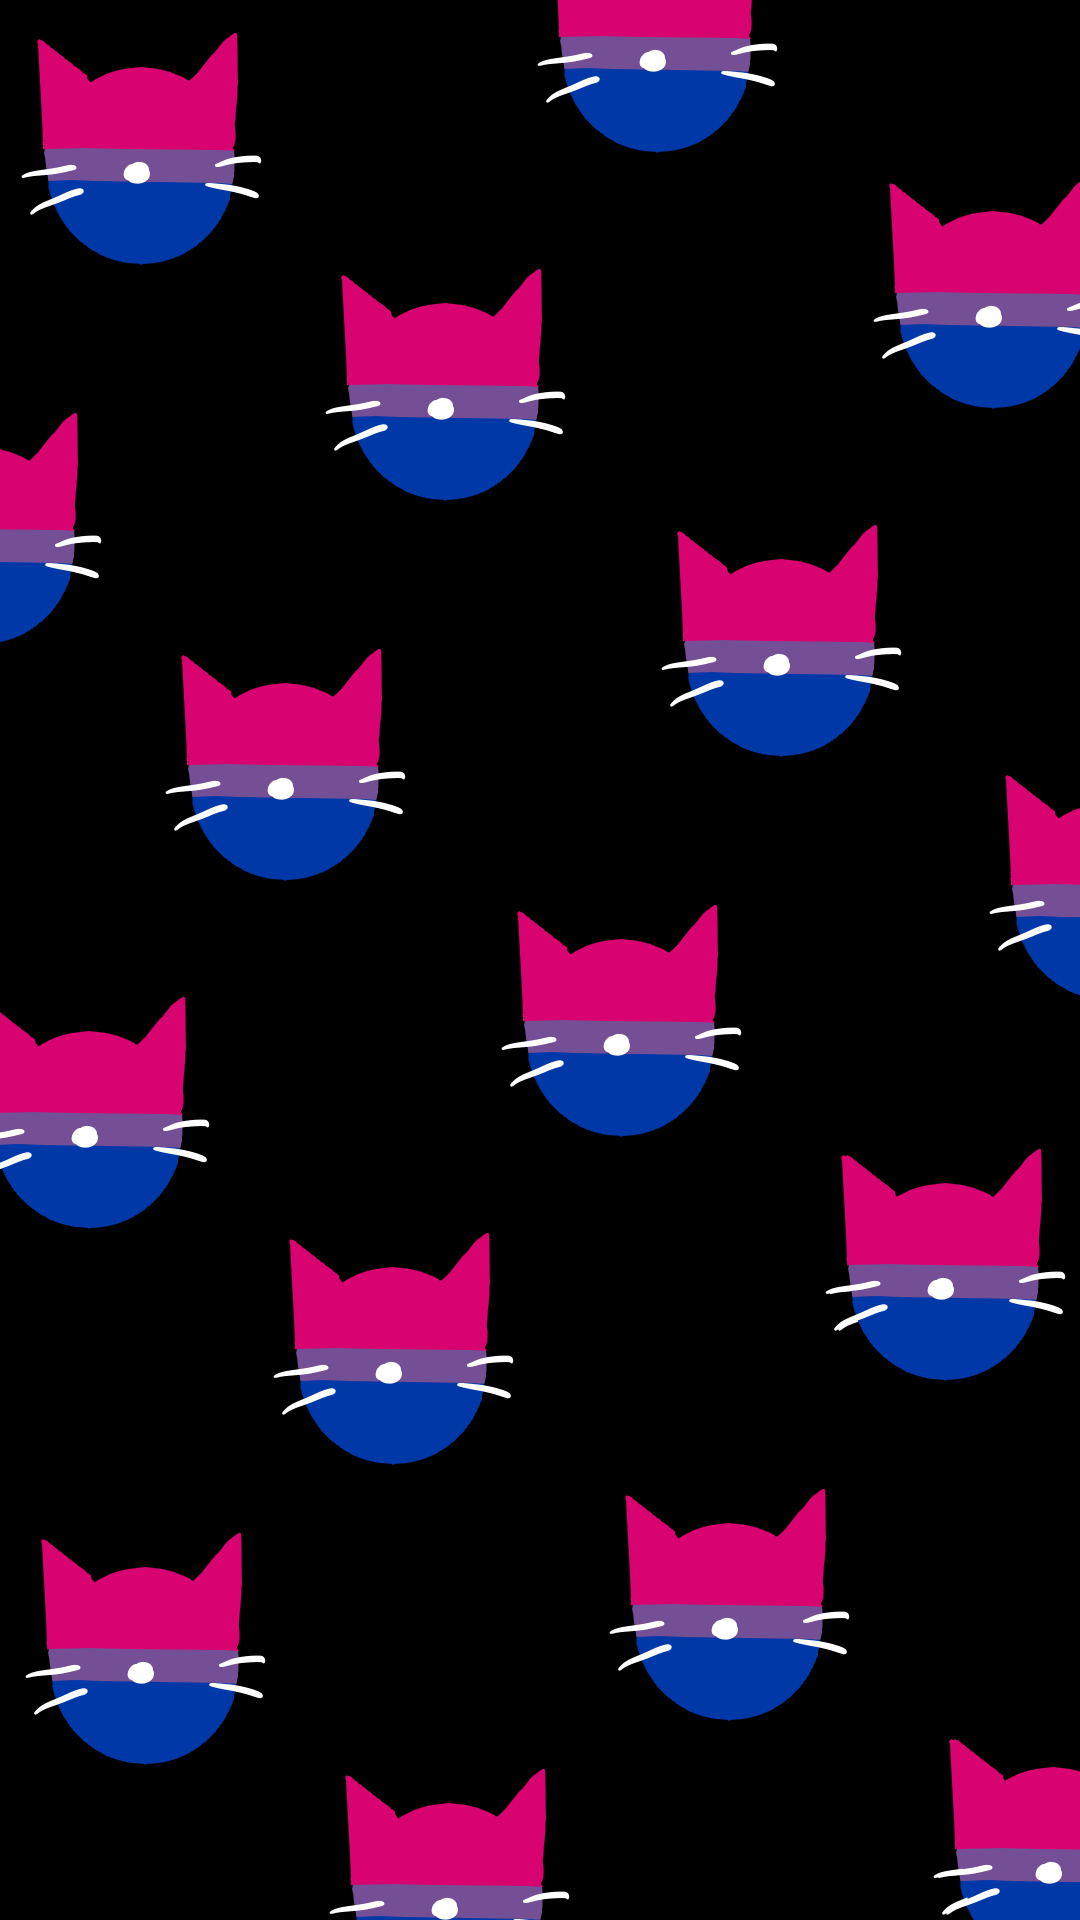 A pattern of pink and blue cats on black - Bisexual